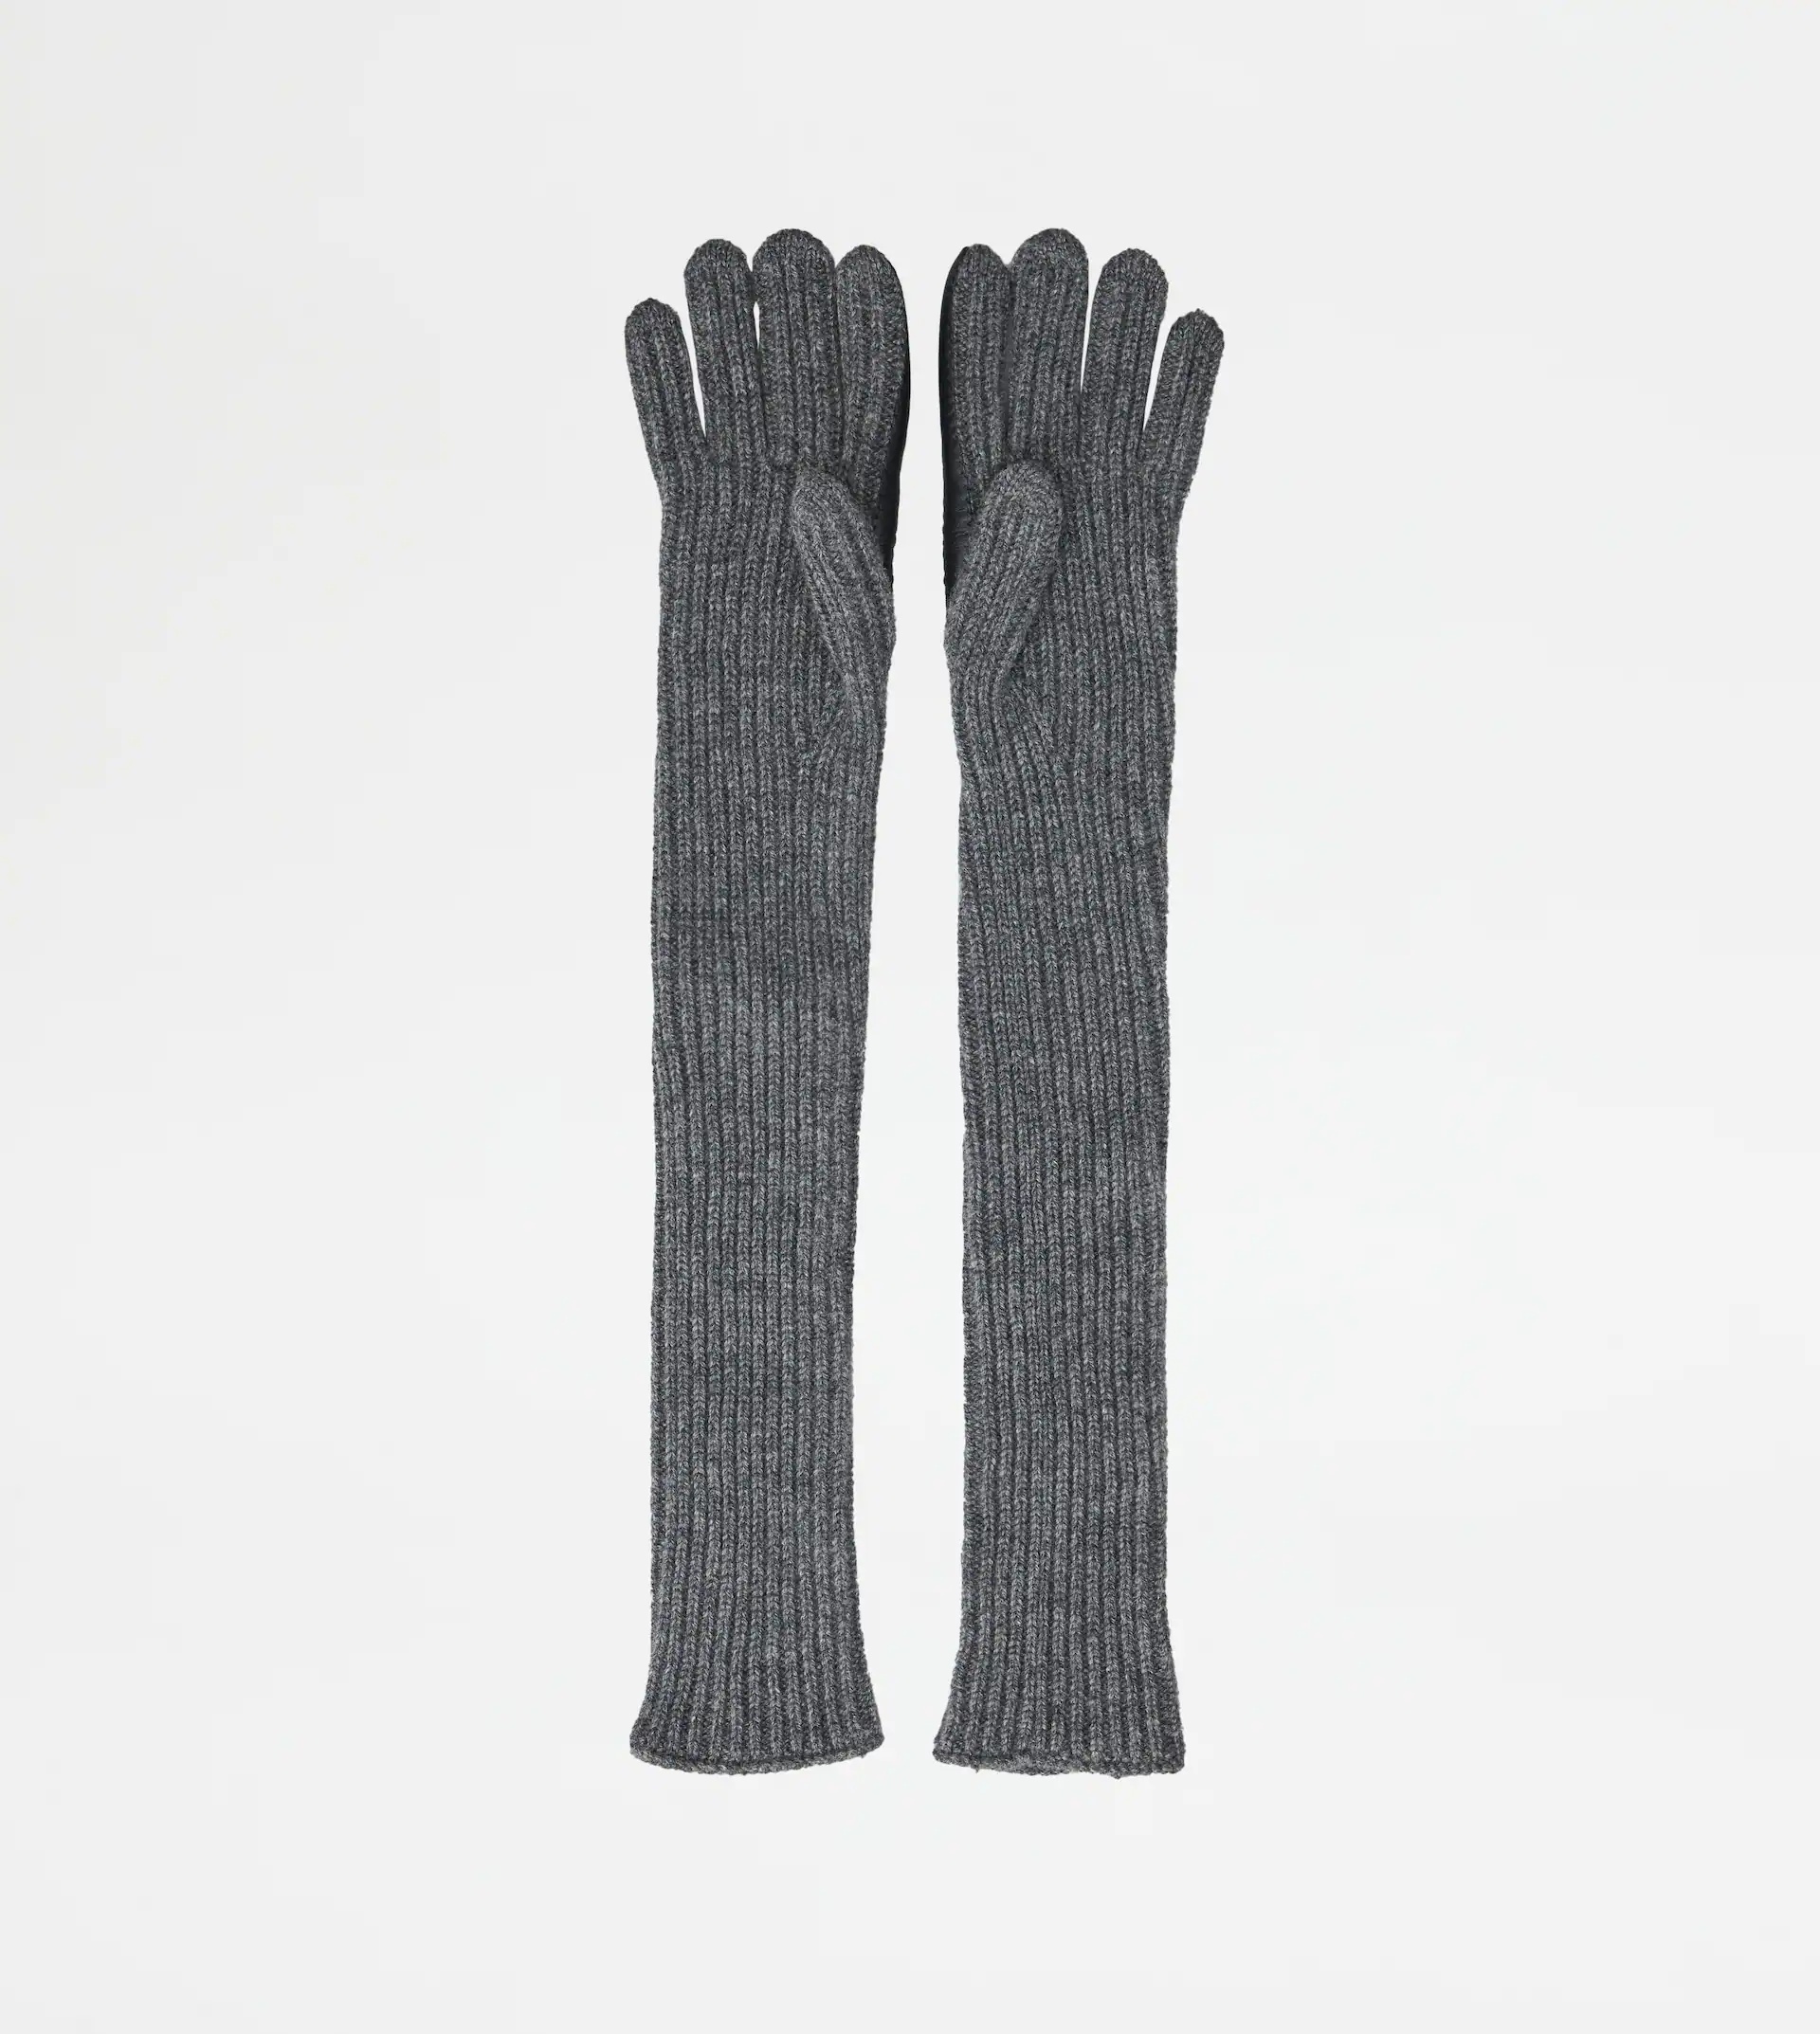 LONG GLOVES IN CASHMERE AND LEATHER - BLACK, SILVER - 3